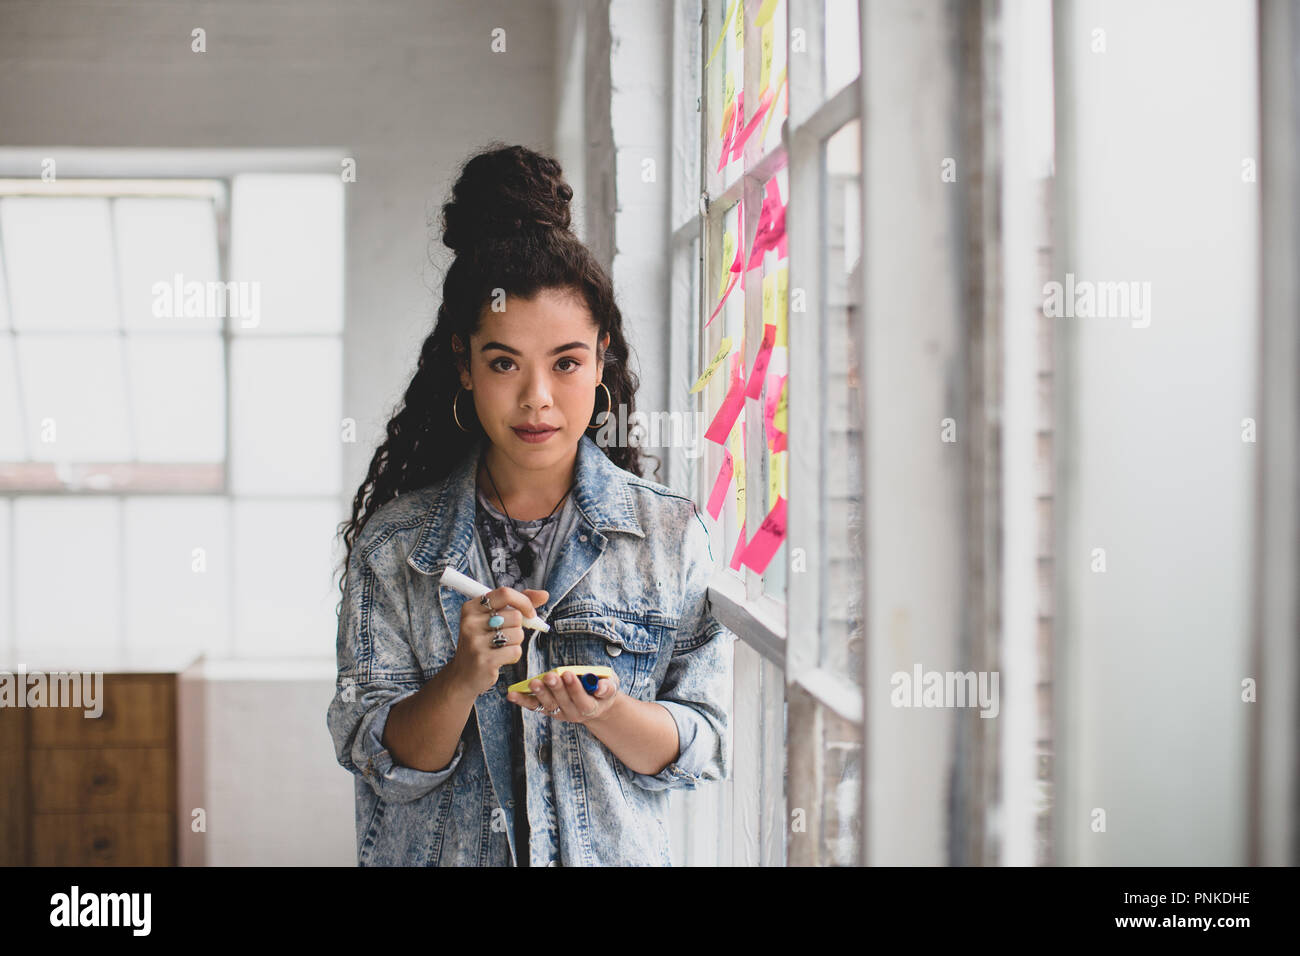 Portrait of young adult female brainstorming in a creative office with adhesive notes Stock Photo